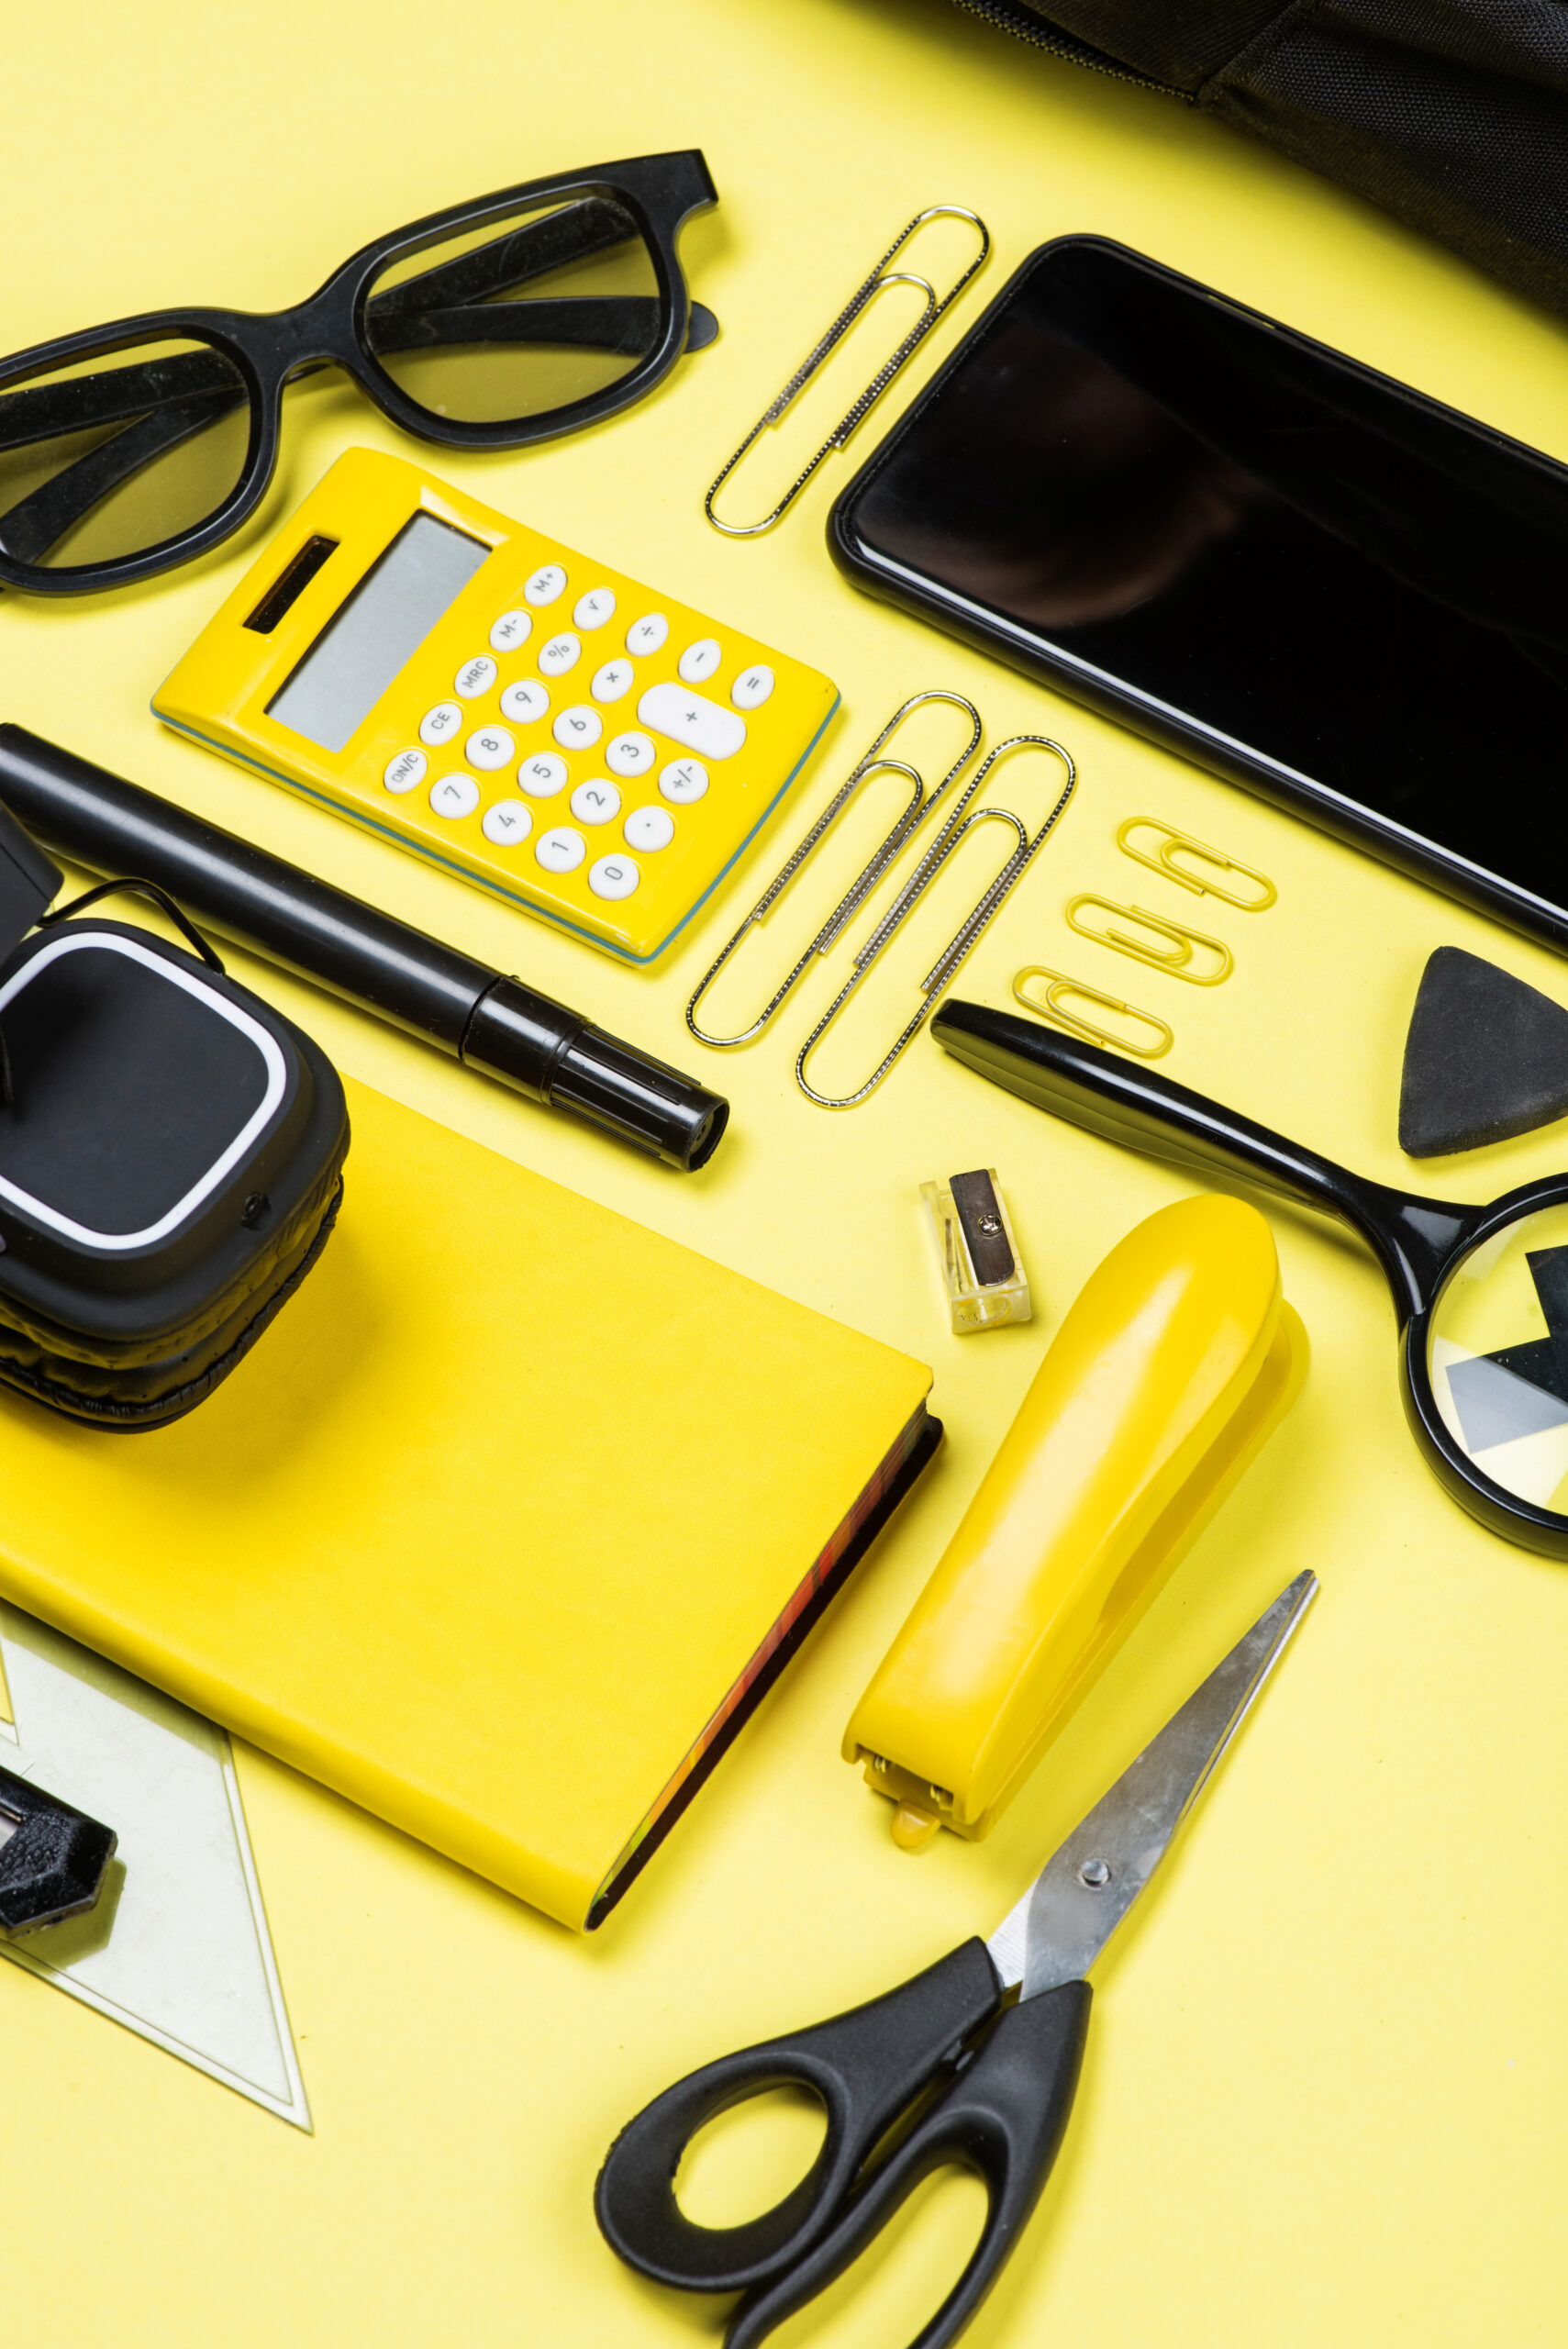 Close-up view of calculator, smartphone and school supplies on yellow